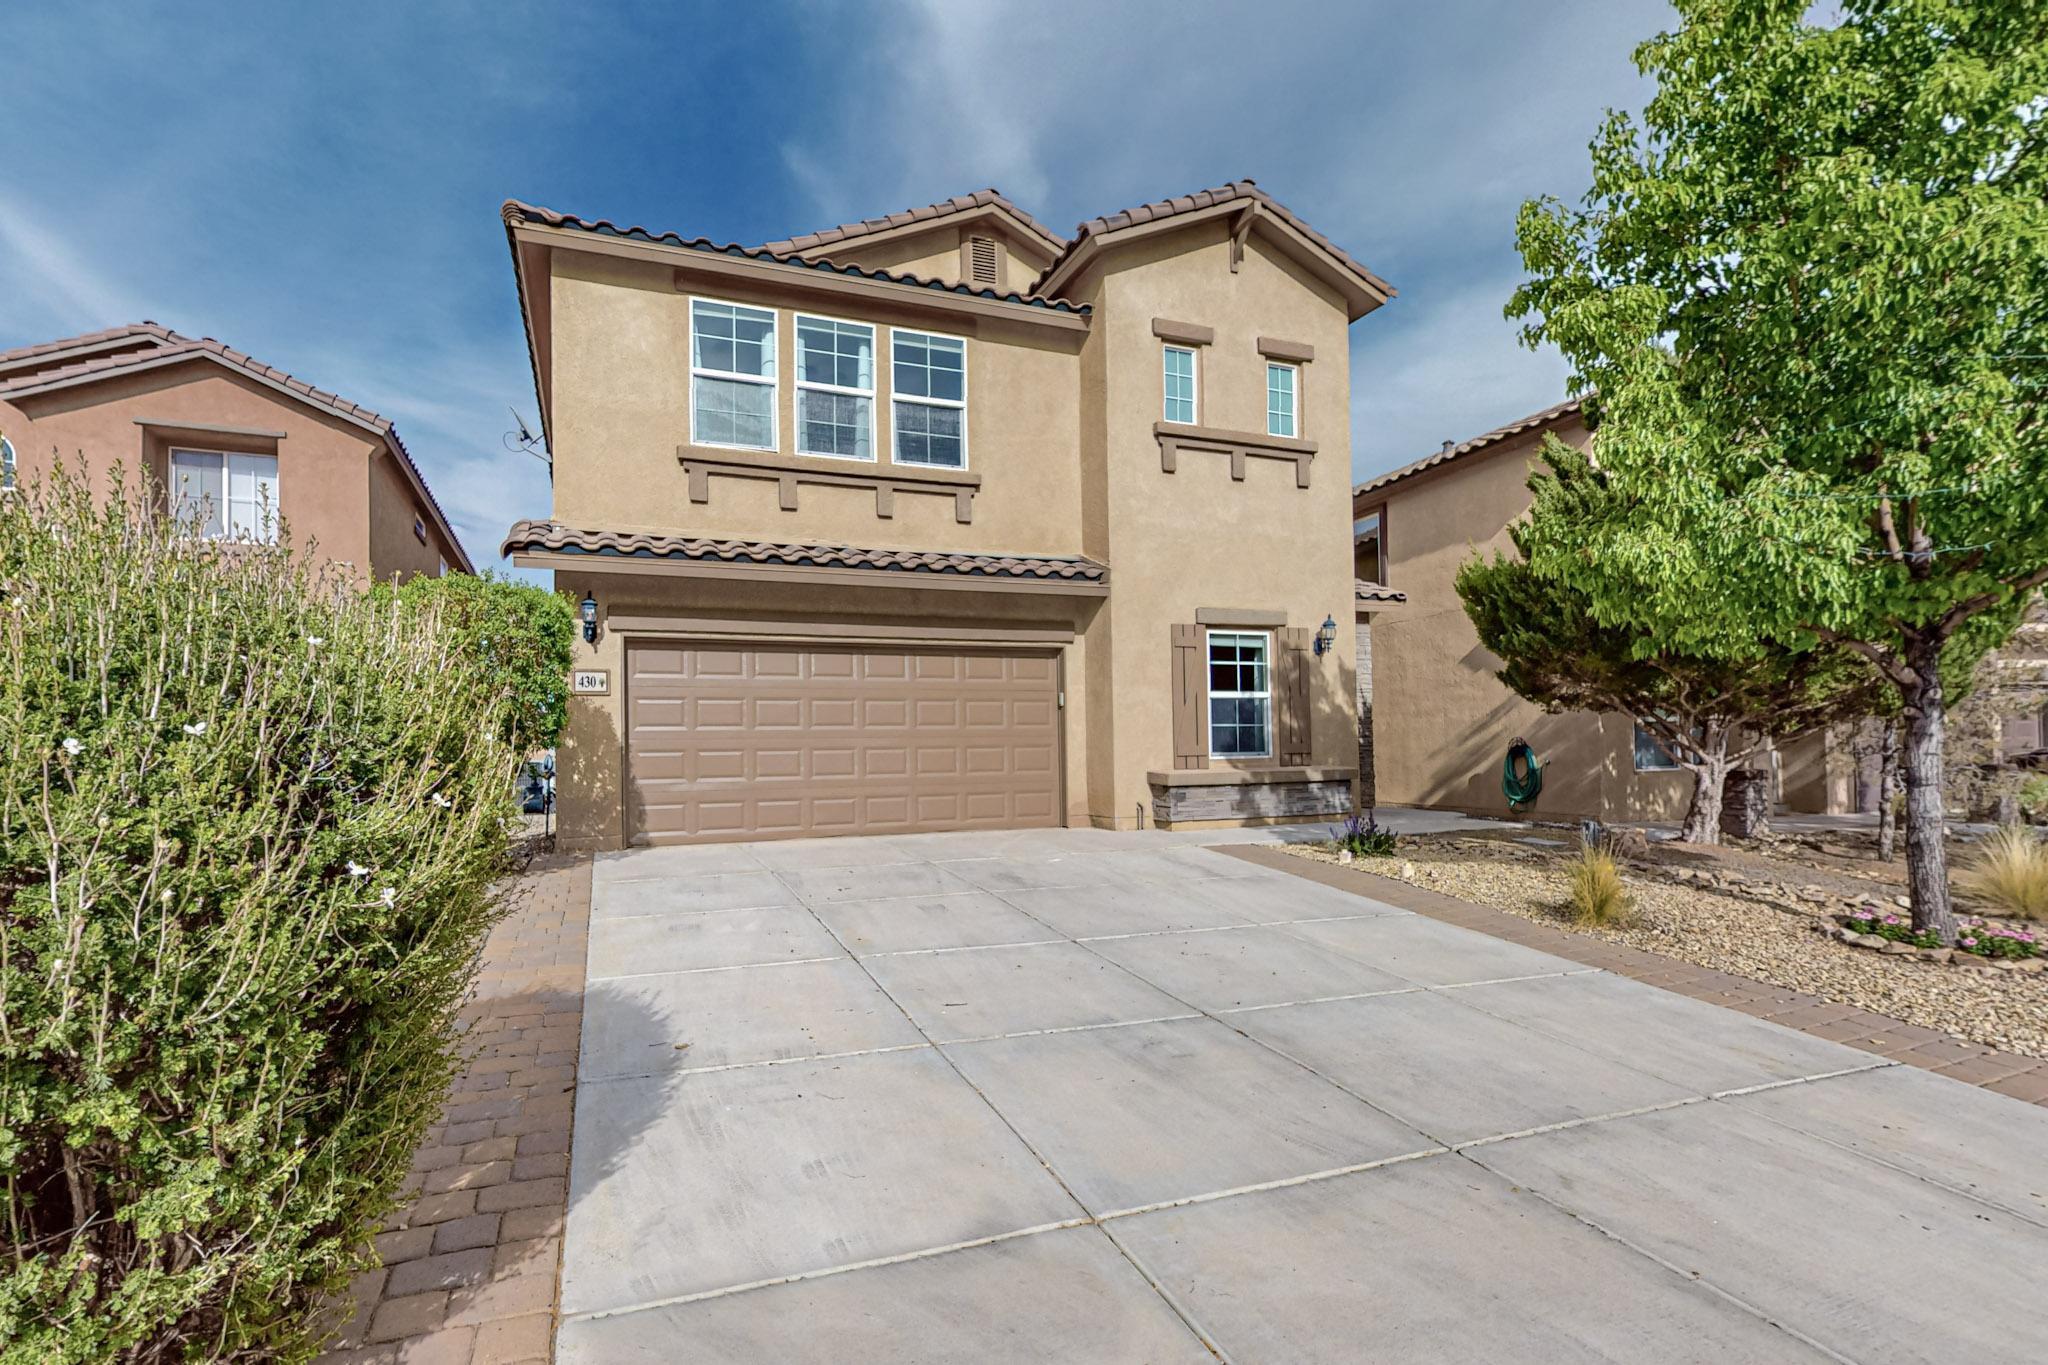 430 Paseo Roja Place NE, Rio Rancho, New Mexico 87124, 4 Bedrooms Bedrooms, ,3 BathroomsBathrooms,Residential,For Sale,430 Paseo Roja Place NE,1061482